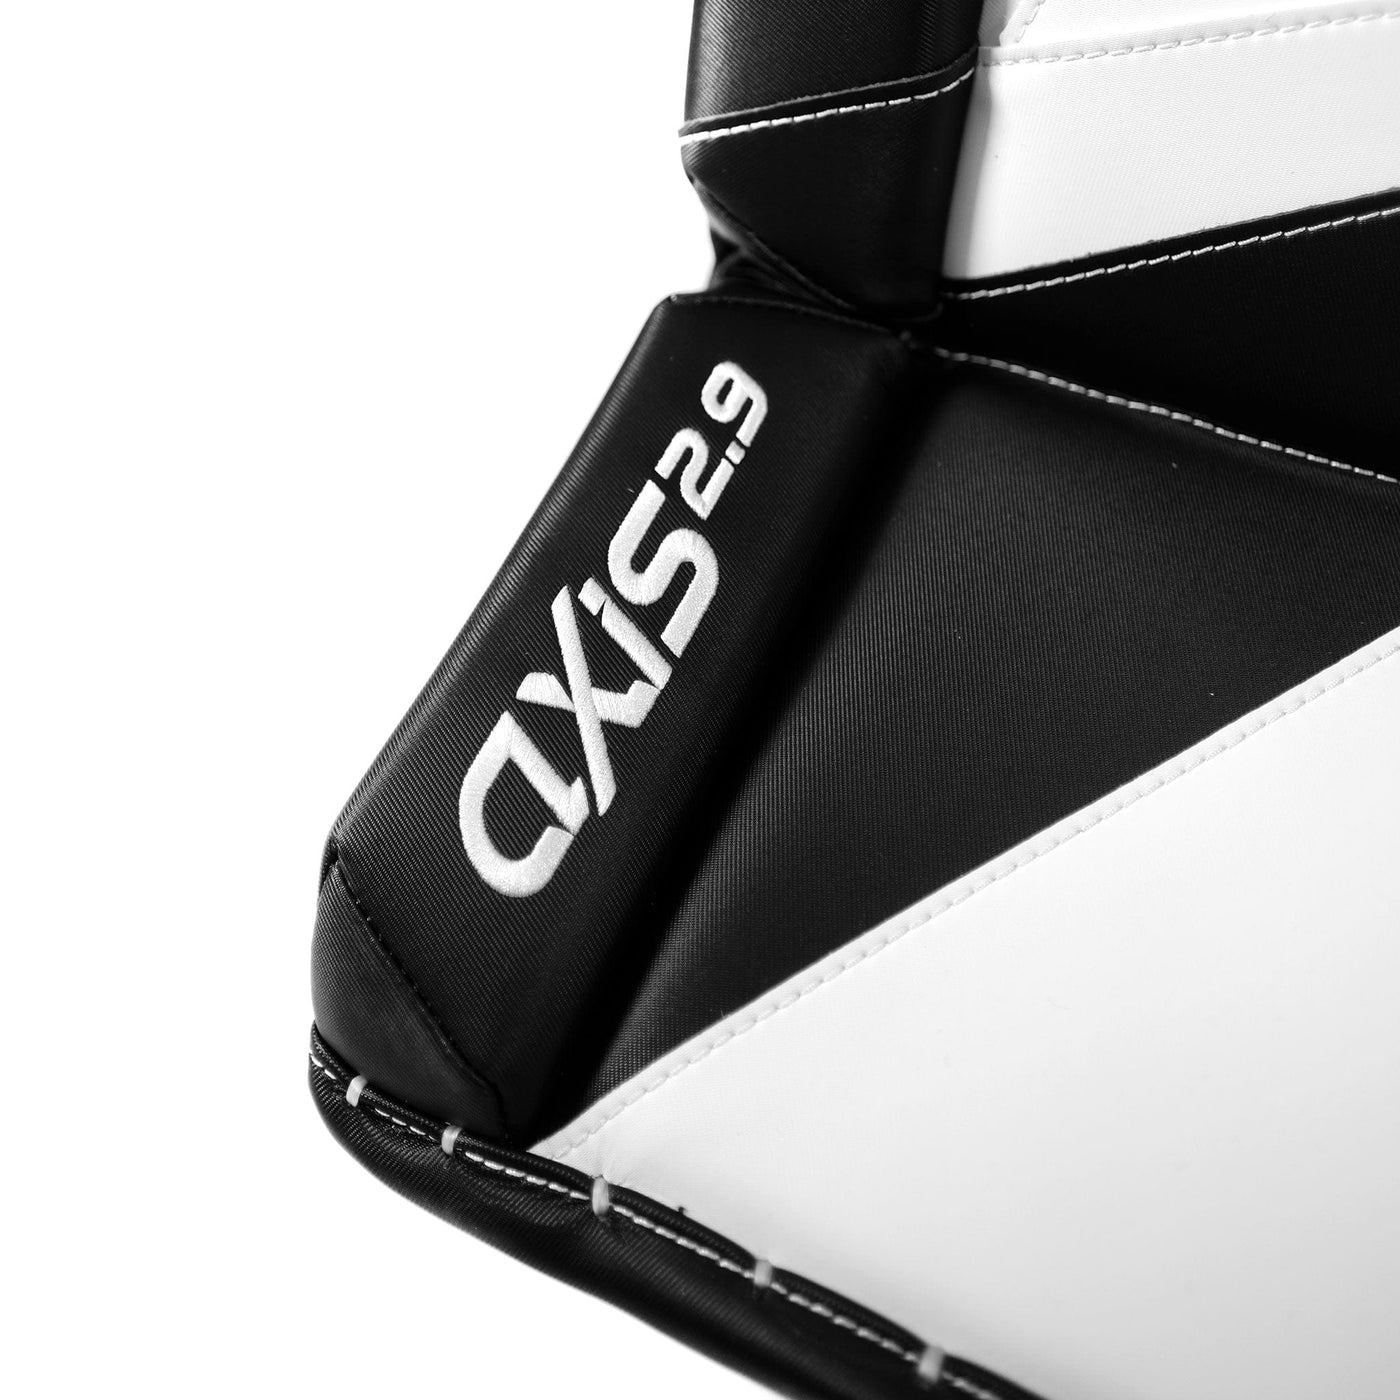 CCM Axis 2.9 Senior Goalie Leg Pads - Source Exclusive - The Hockey Shop Source For Sports